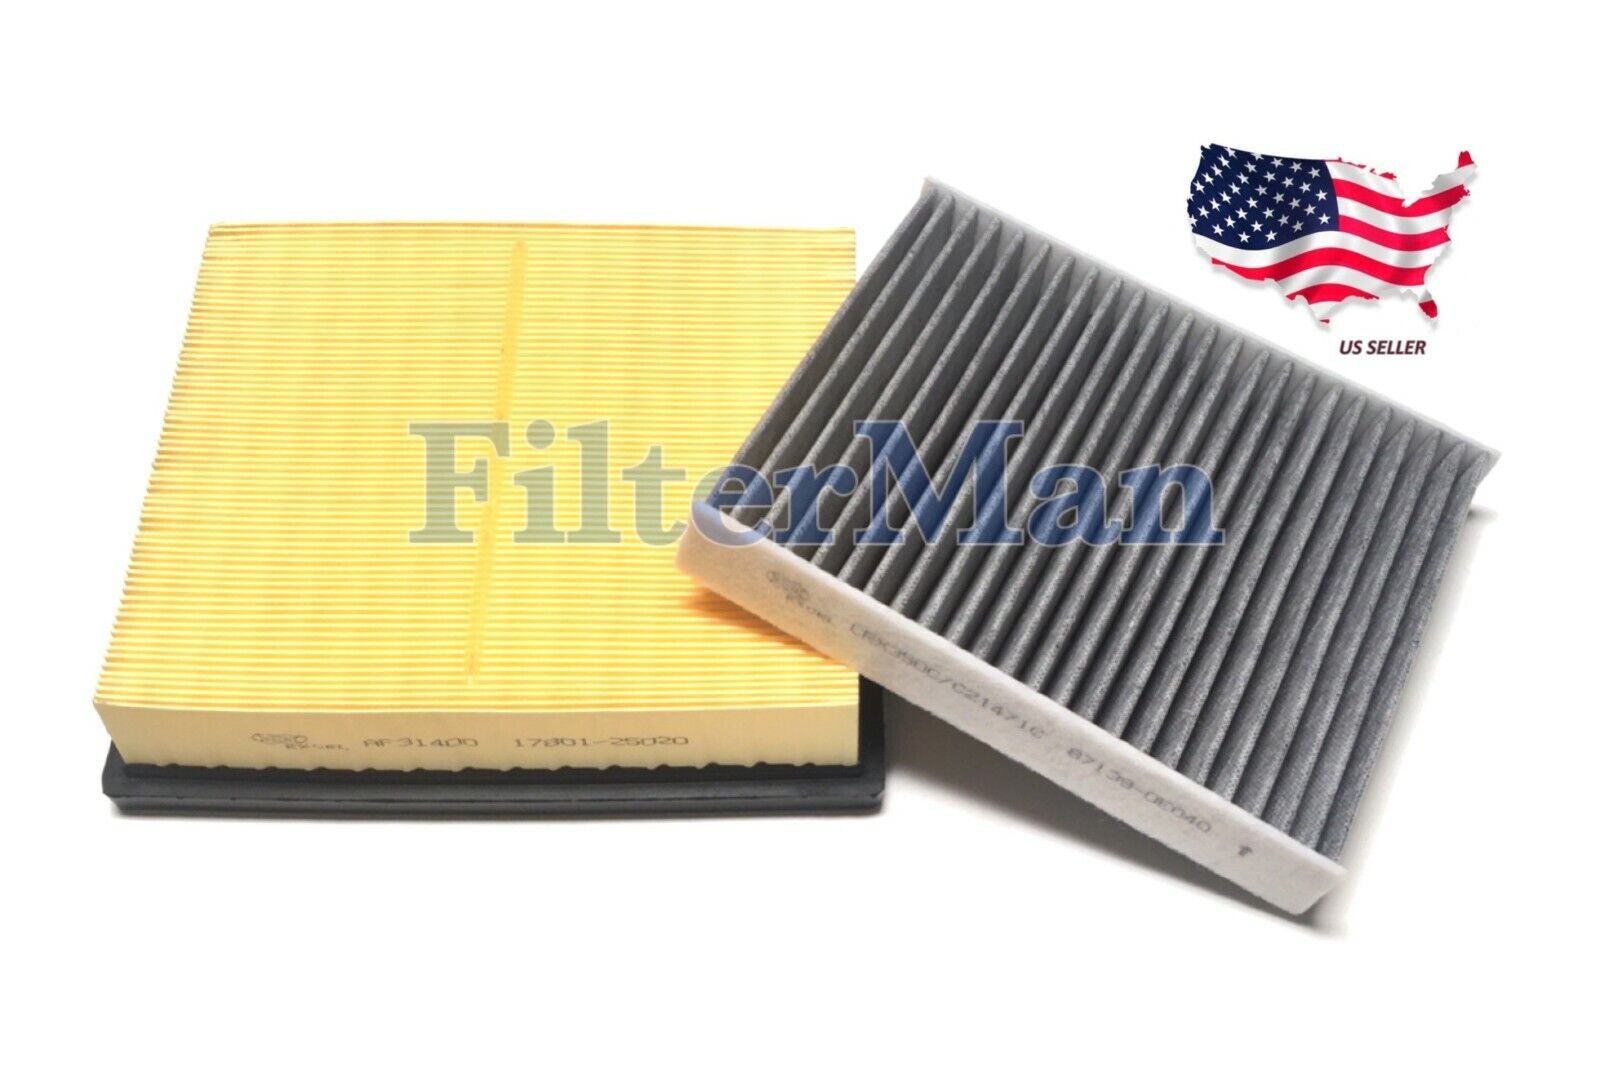 Engine & Carbon Cabin Air Filter For Toyota 18-202CAMRY 19-22 ES350 AVALON Rav4